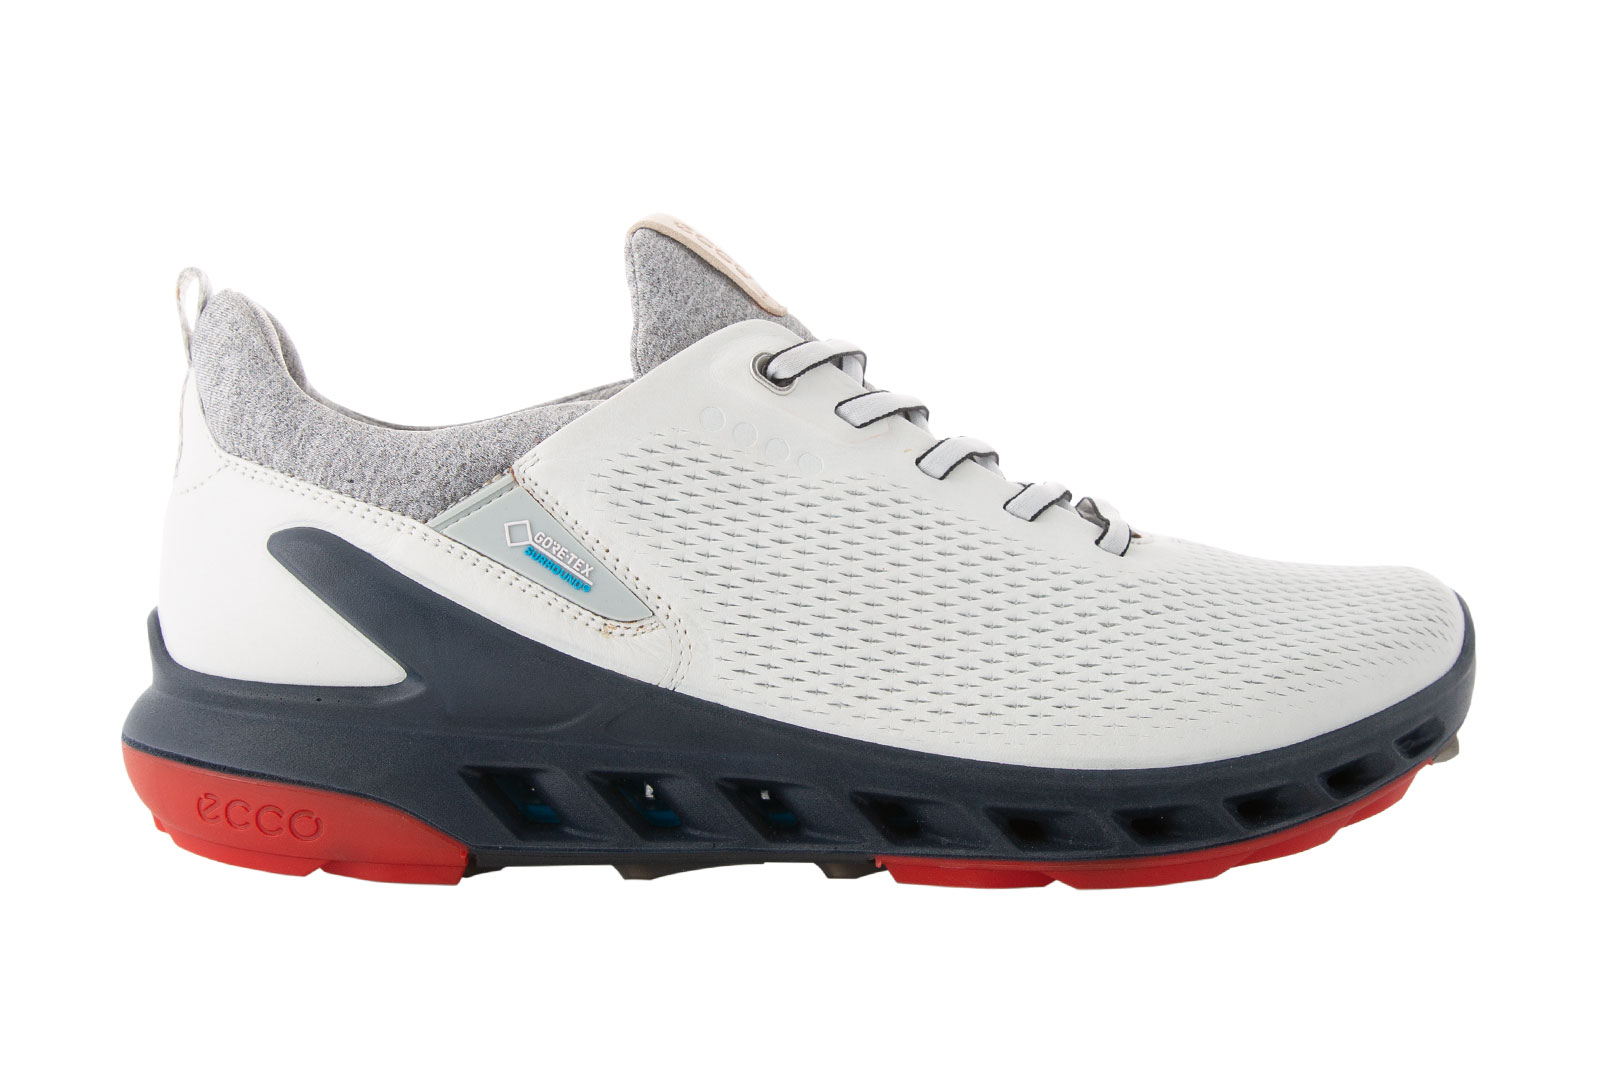 25 Years of ECCO Golf, 2019: ECCO GOLF BIOM COOL PRO the first golf shoe with GORE-TEX SURROUND technology